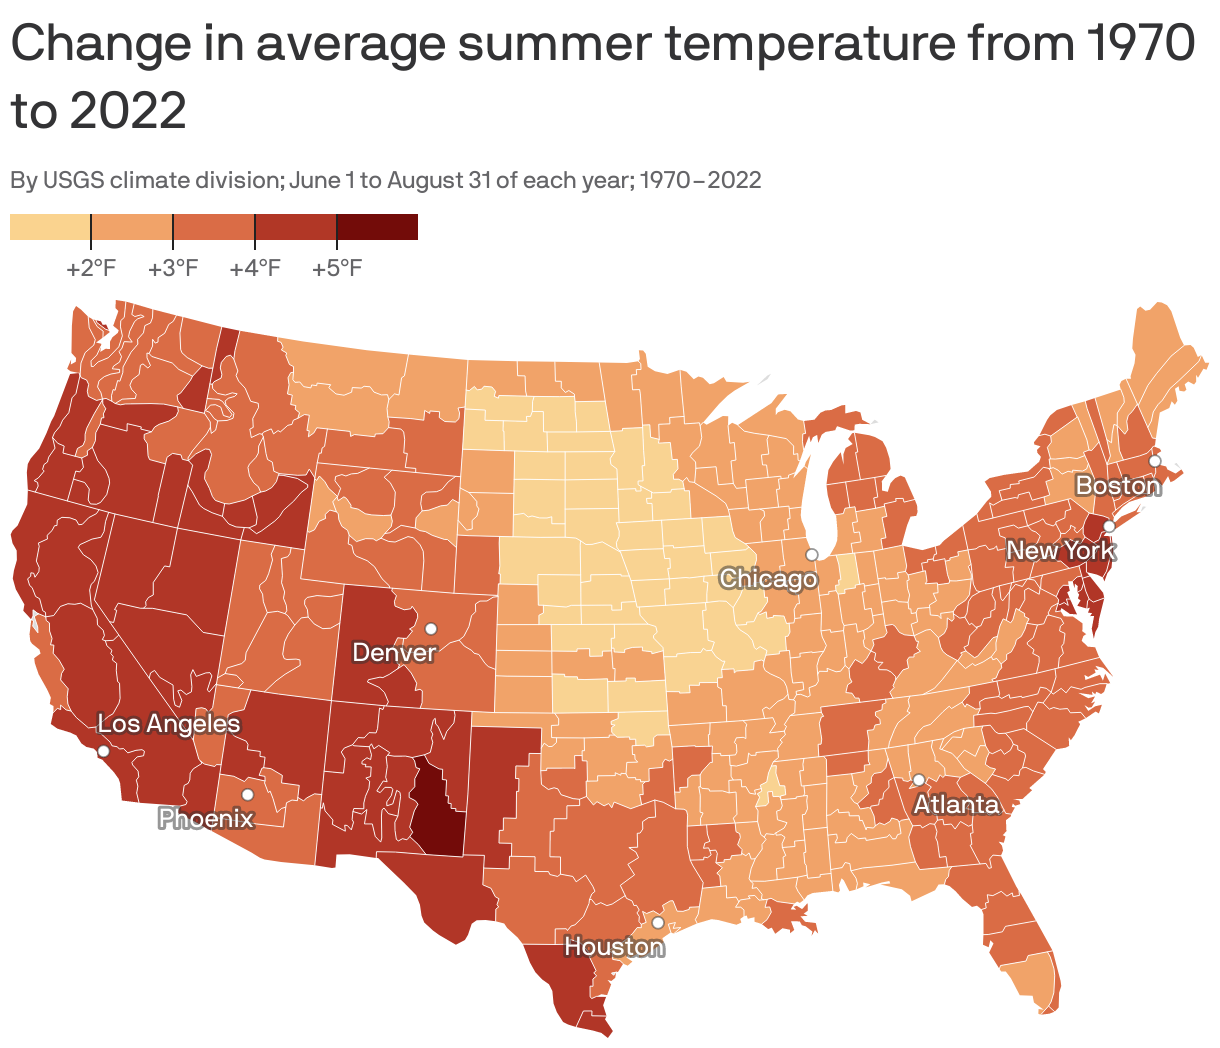 Change in average summer temperature from 1970 to 2022